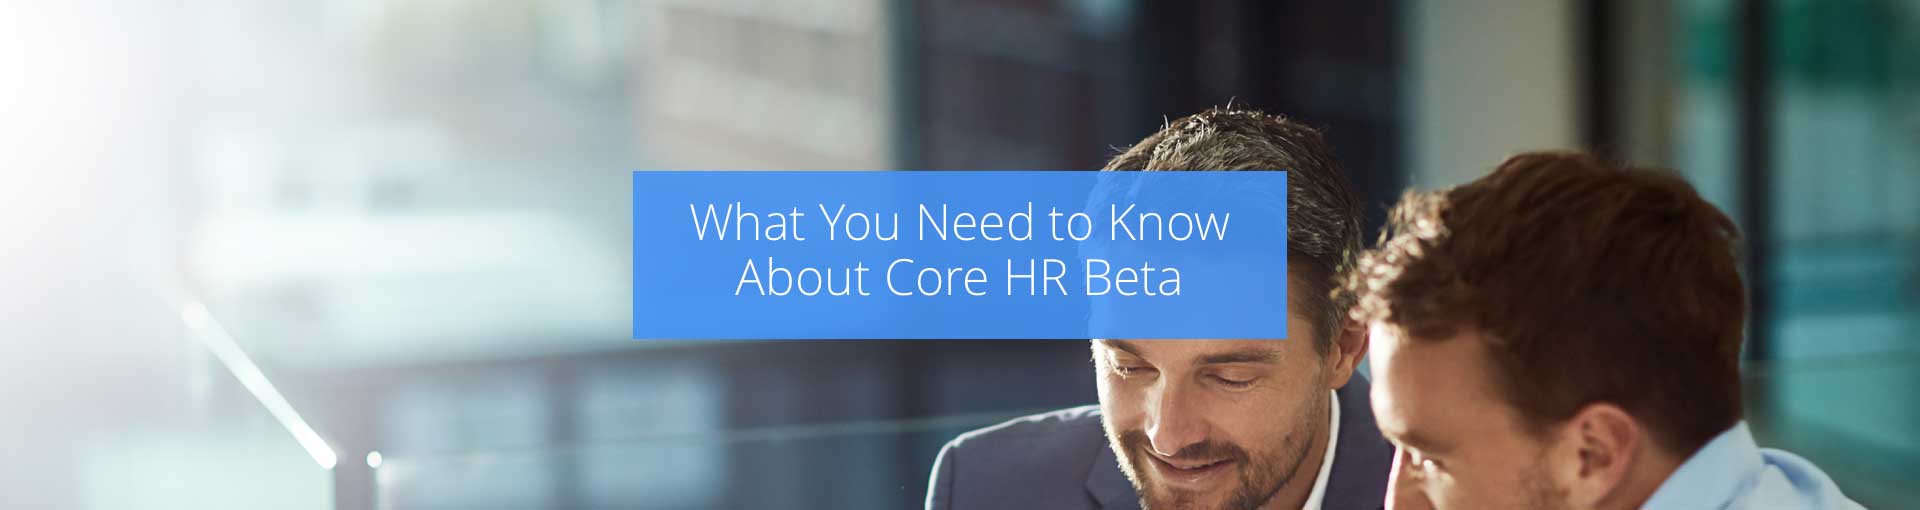 What You Need to Know About Core HR Beta Featured Image